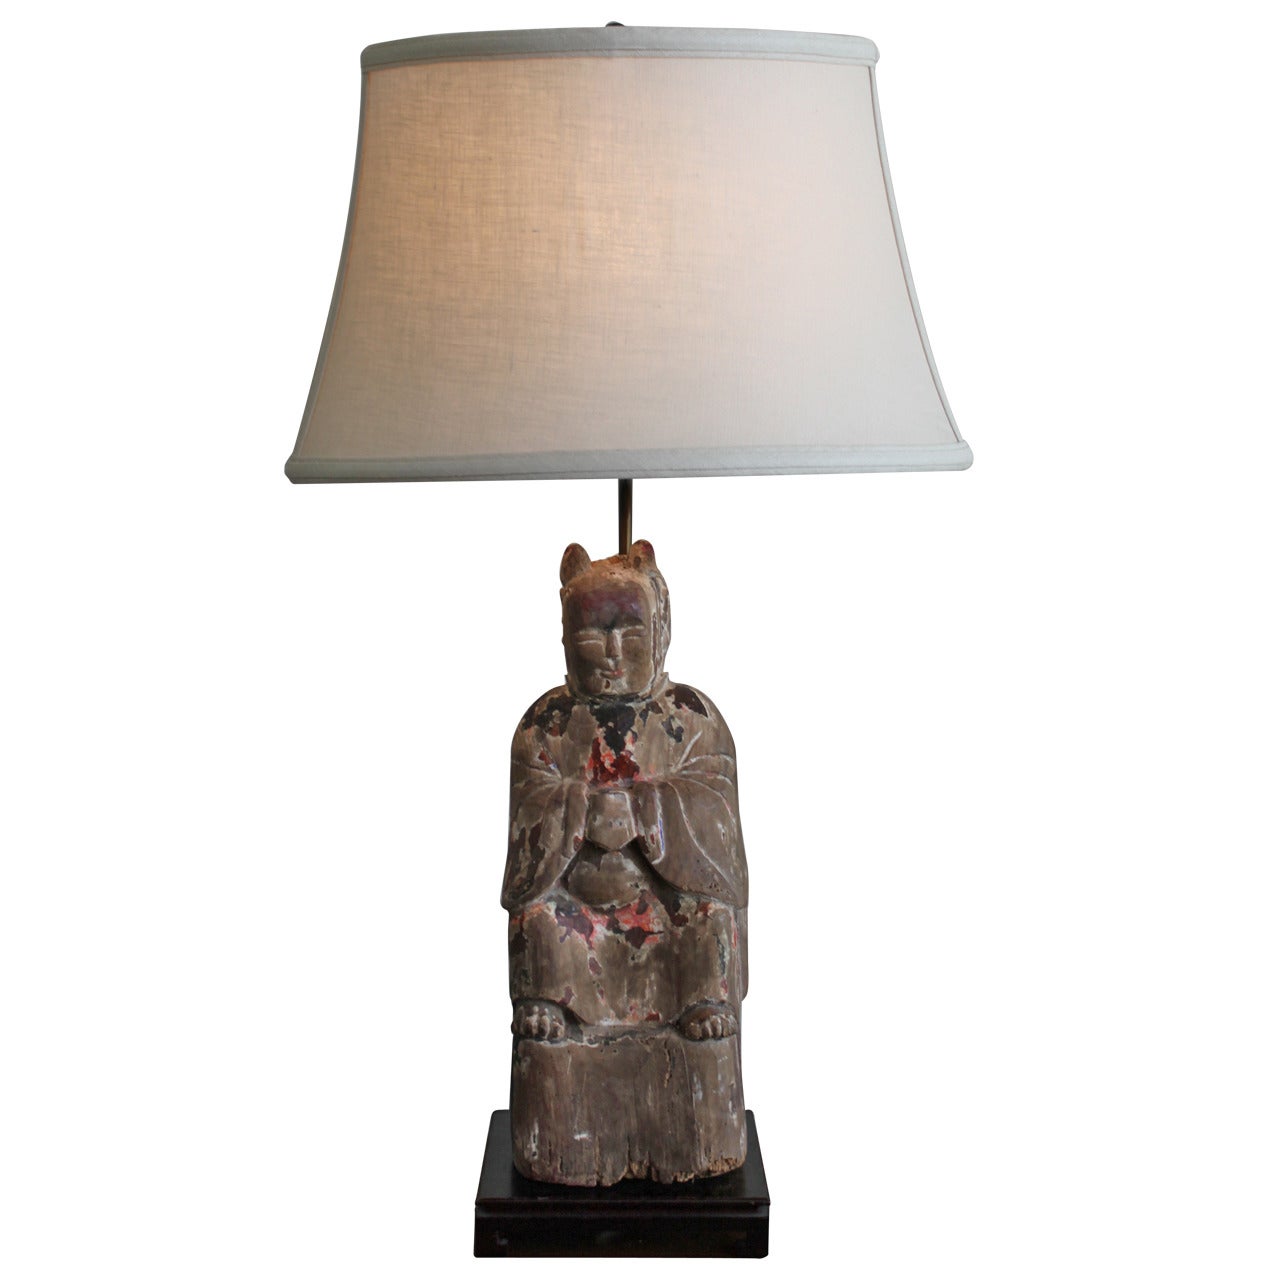 Chinese Polychrome Wood Figure as a Lamp